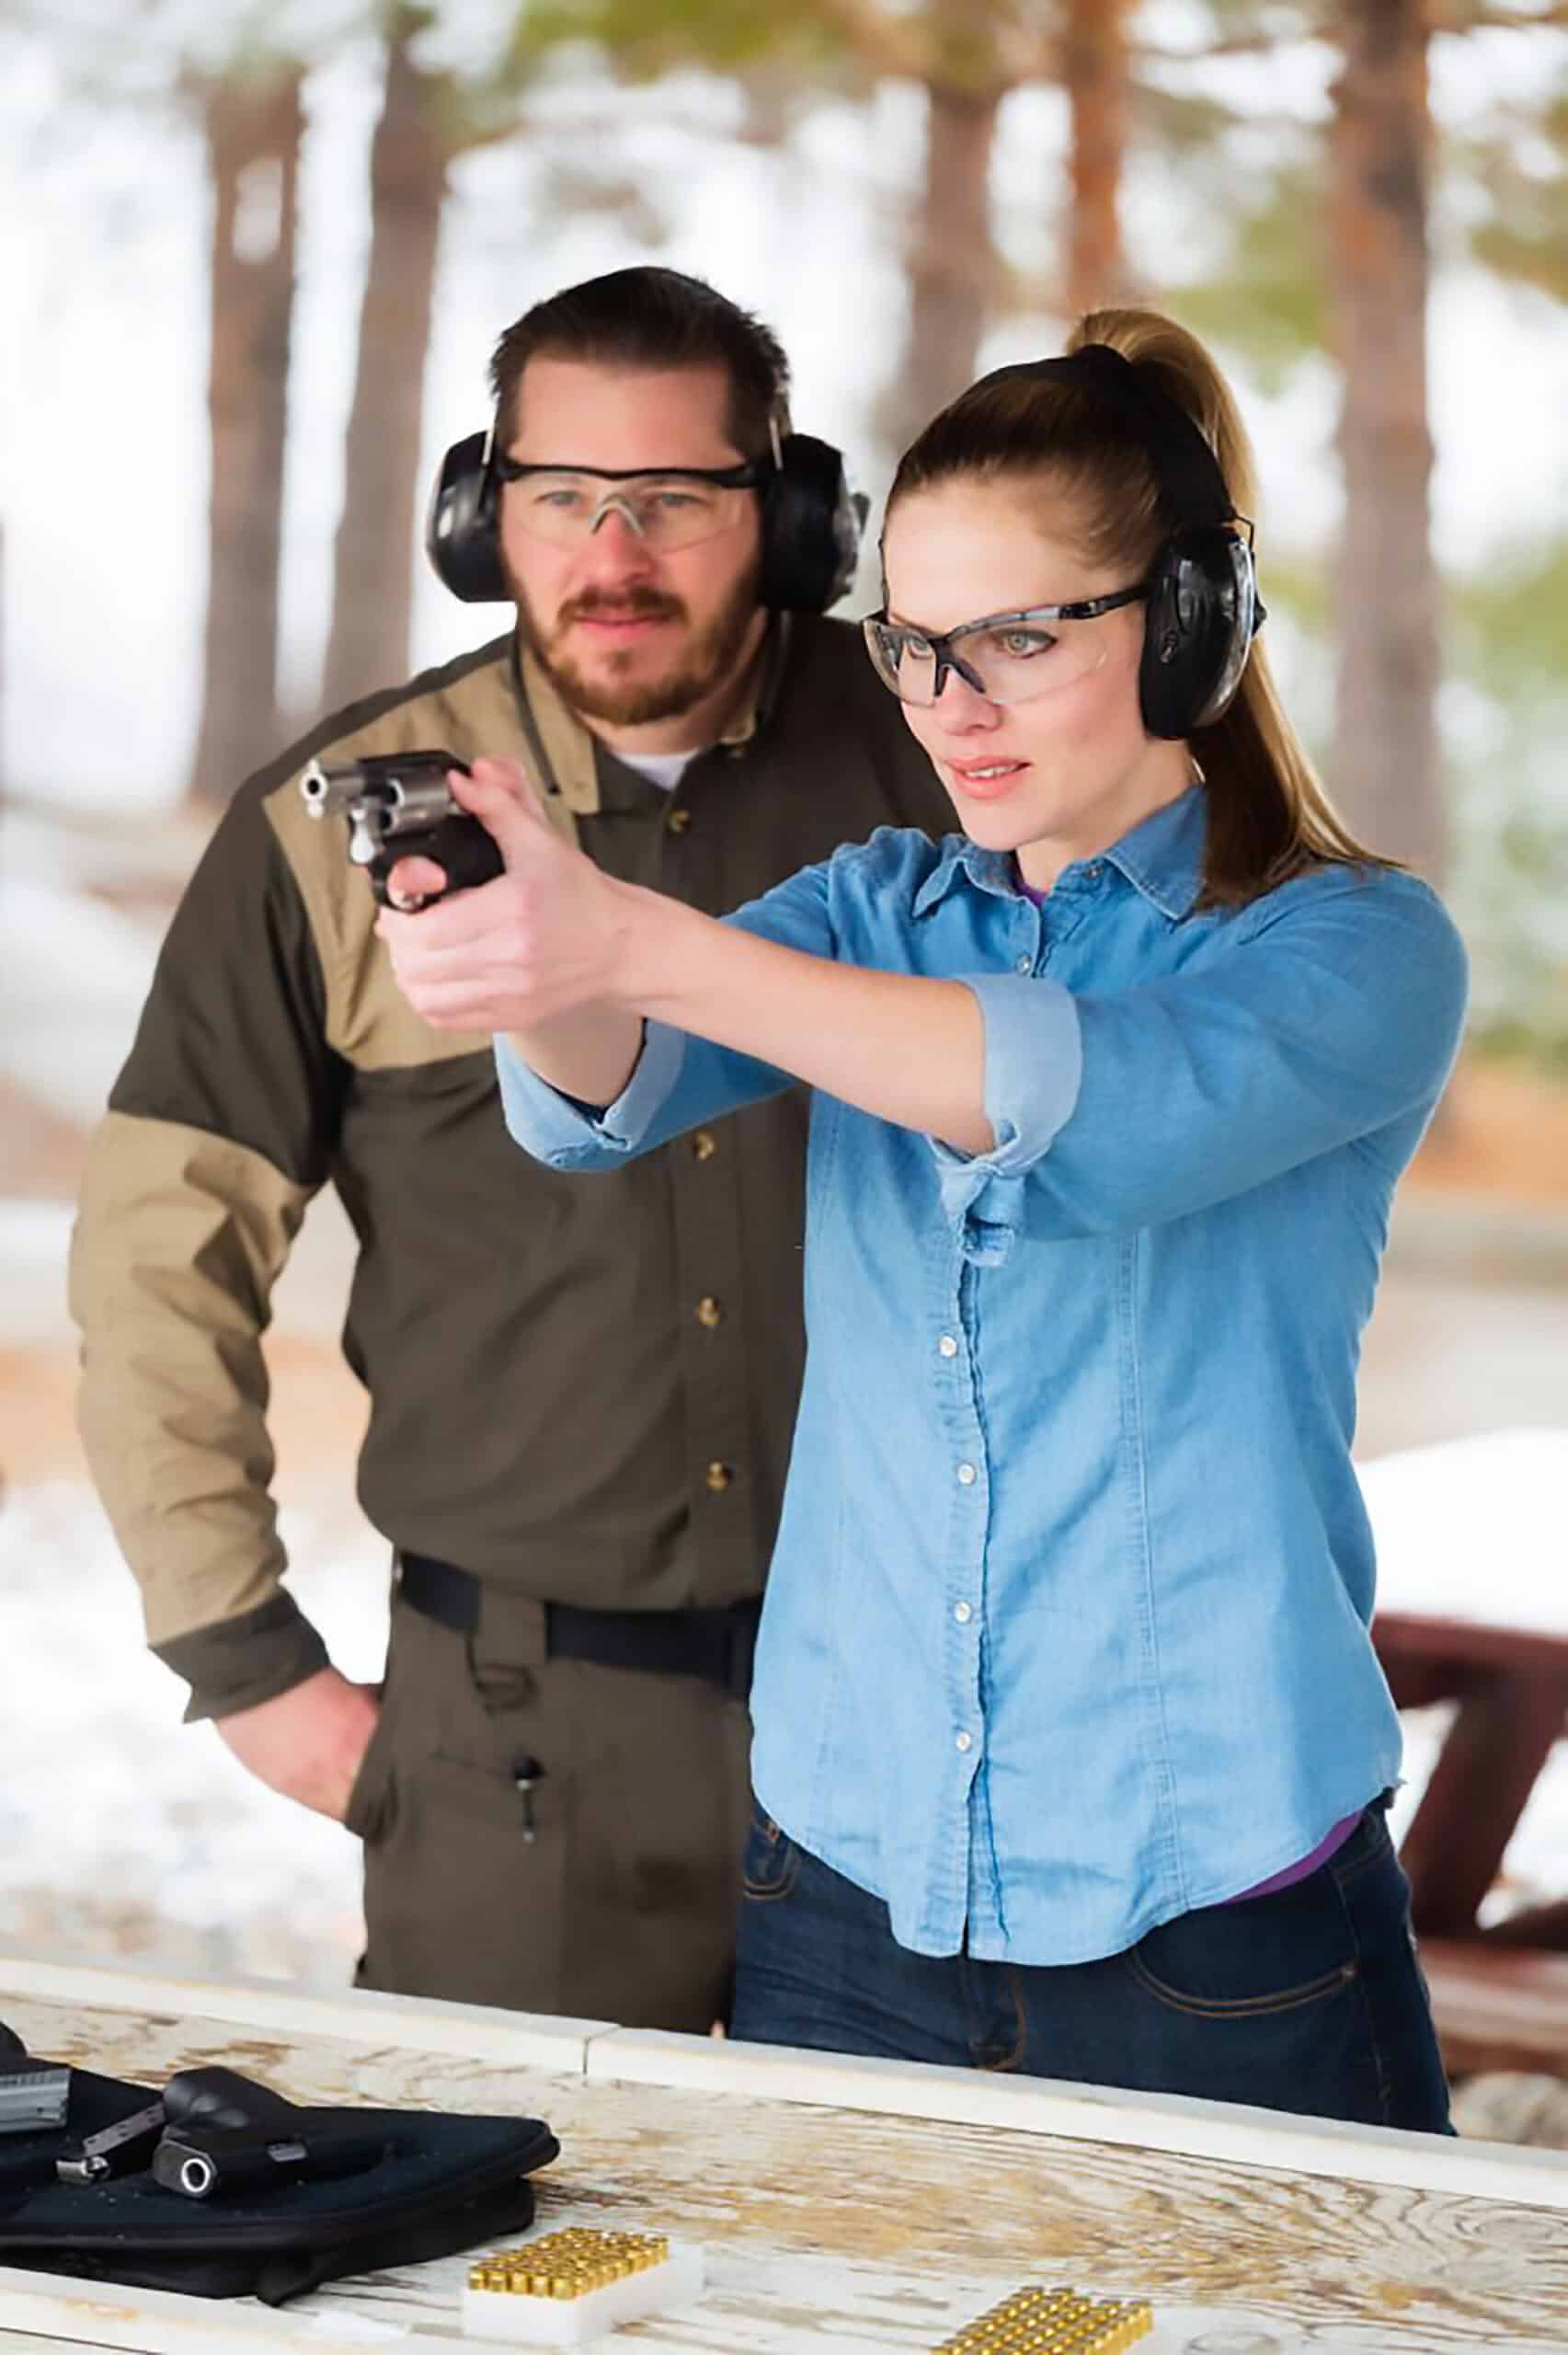 LTC Range Dallas Fort Worth DFW - License to Carry - Concealed Carry - DFW Texas